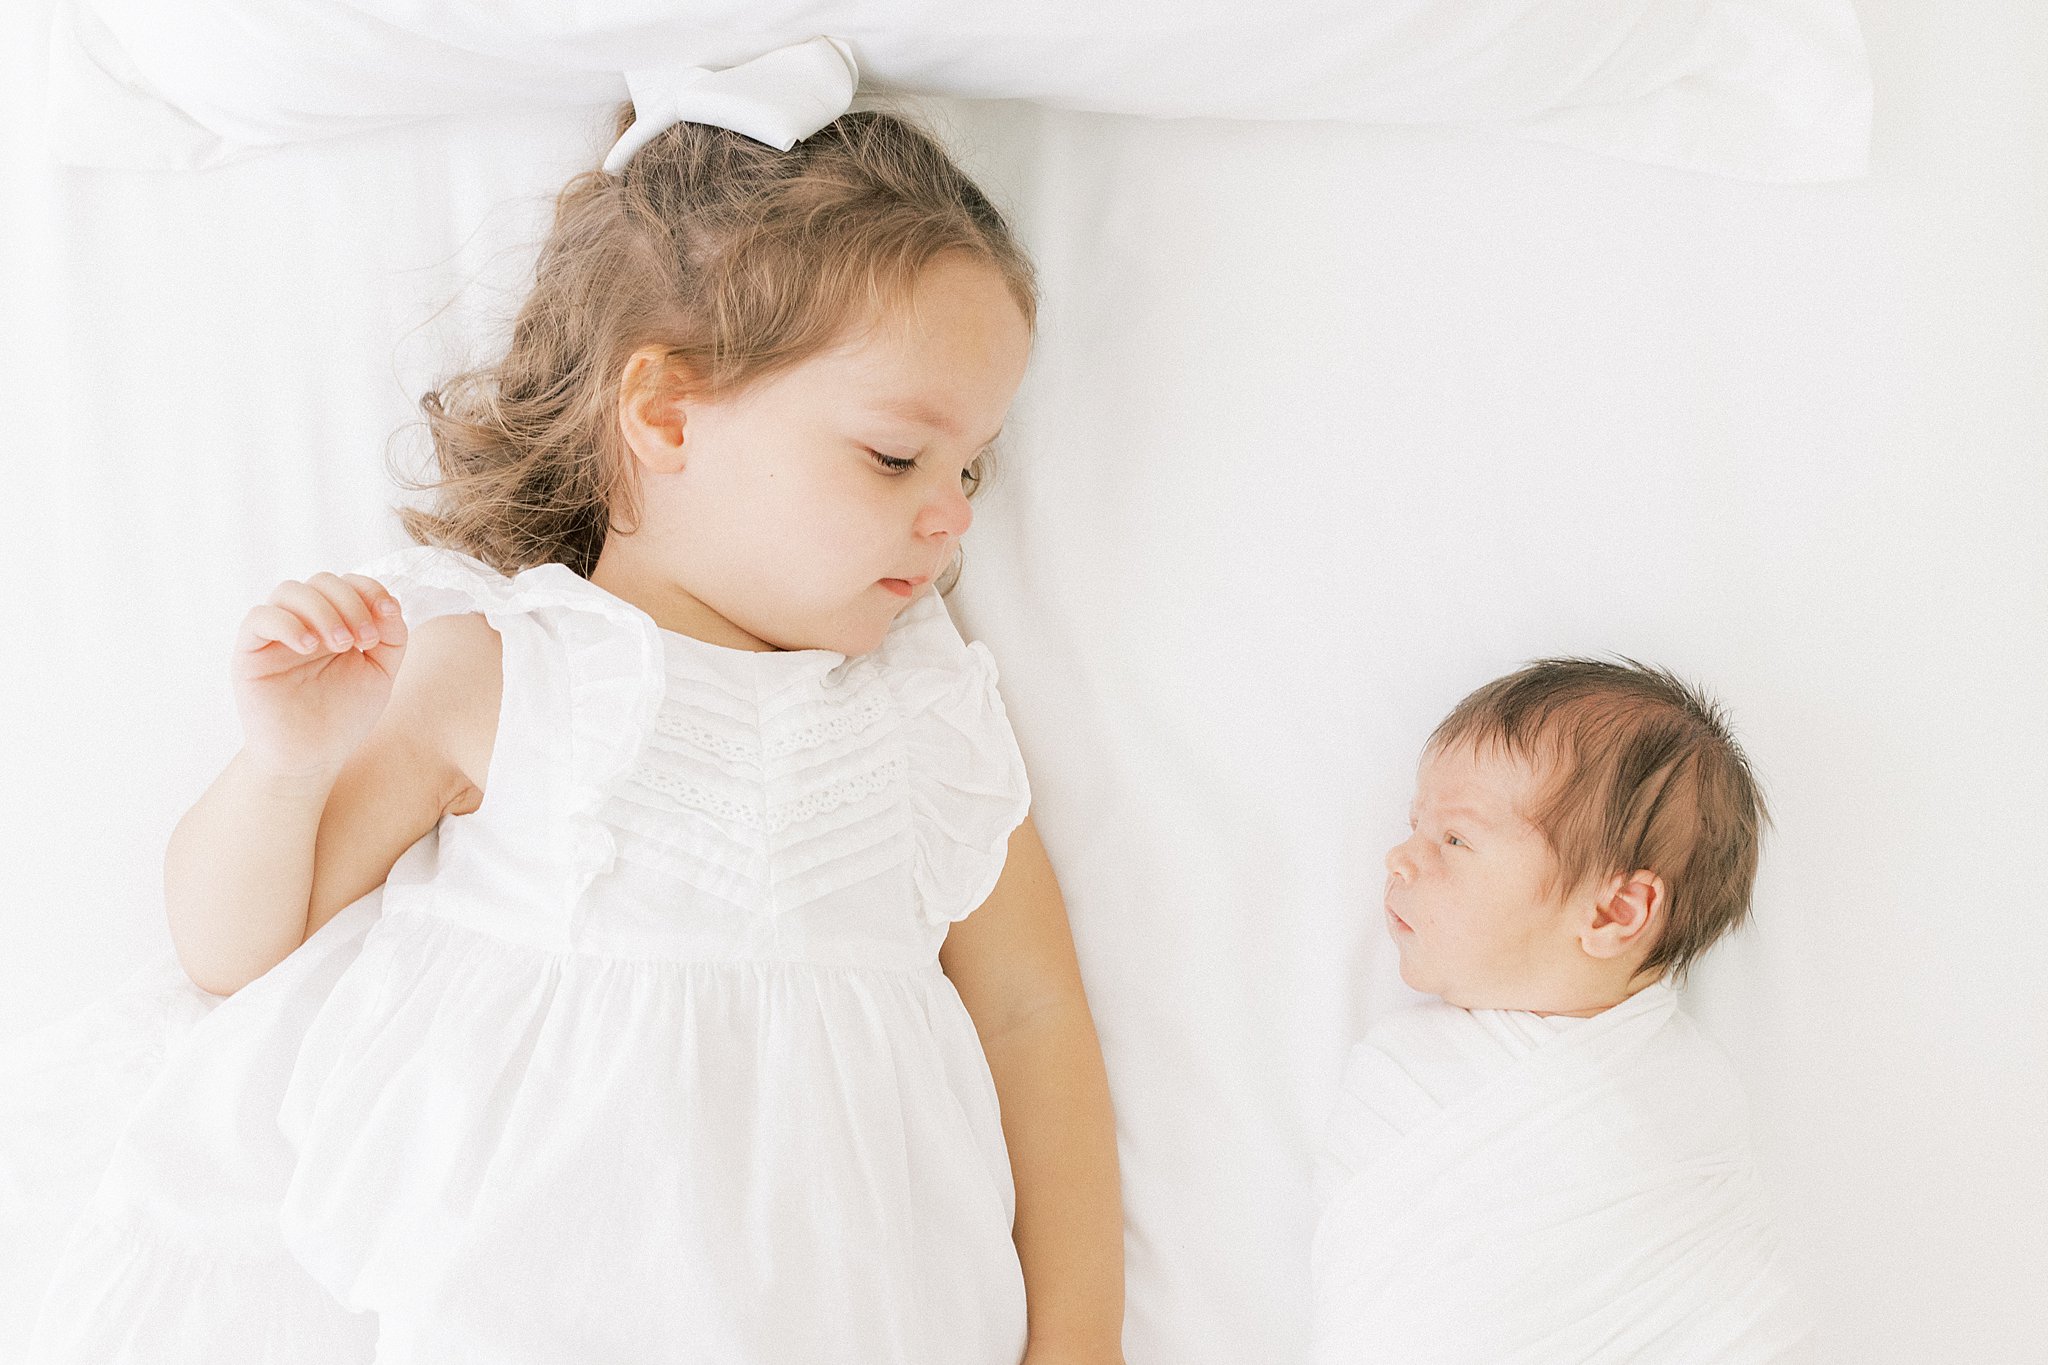 A young girl in a white dress lays on a bed with her newborn baby sibling wrapped in a white swaddle layette dallas